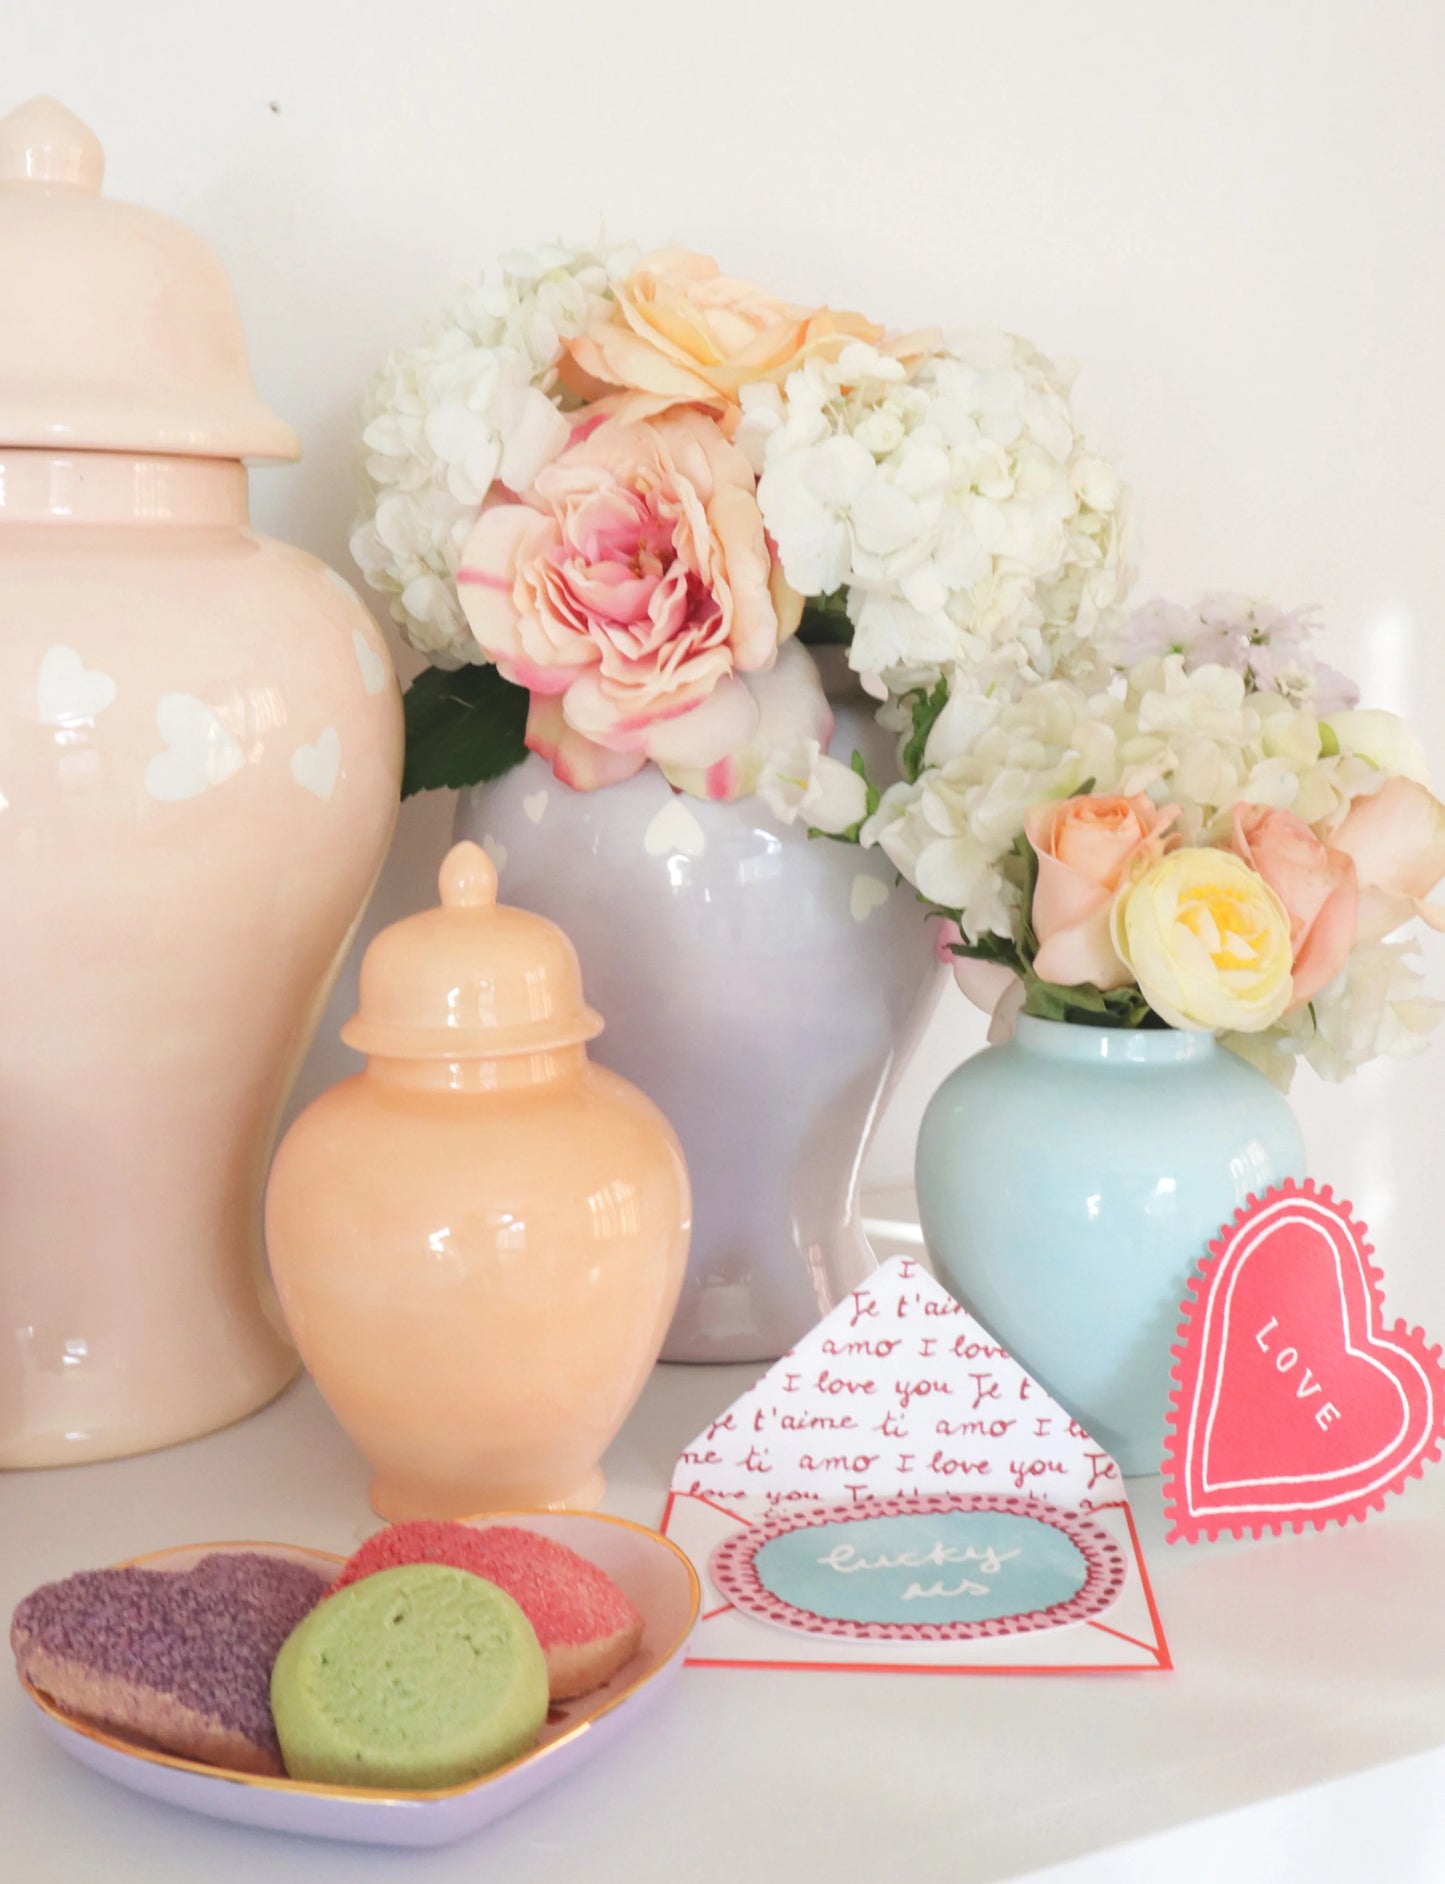 "Love is in the Air" Ginger Jars in Blush